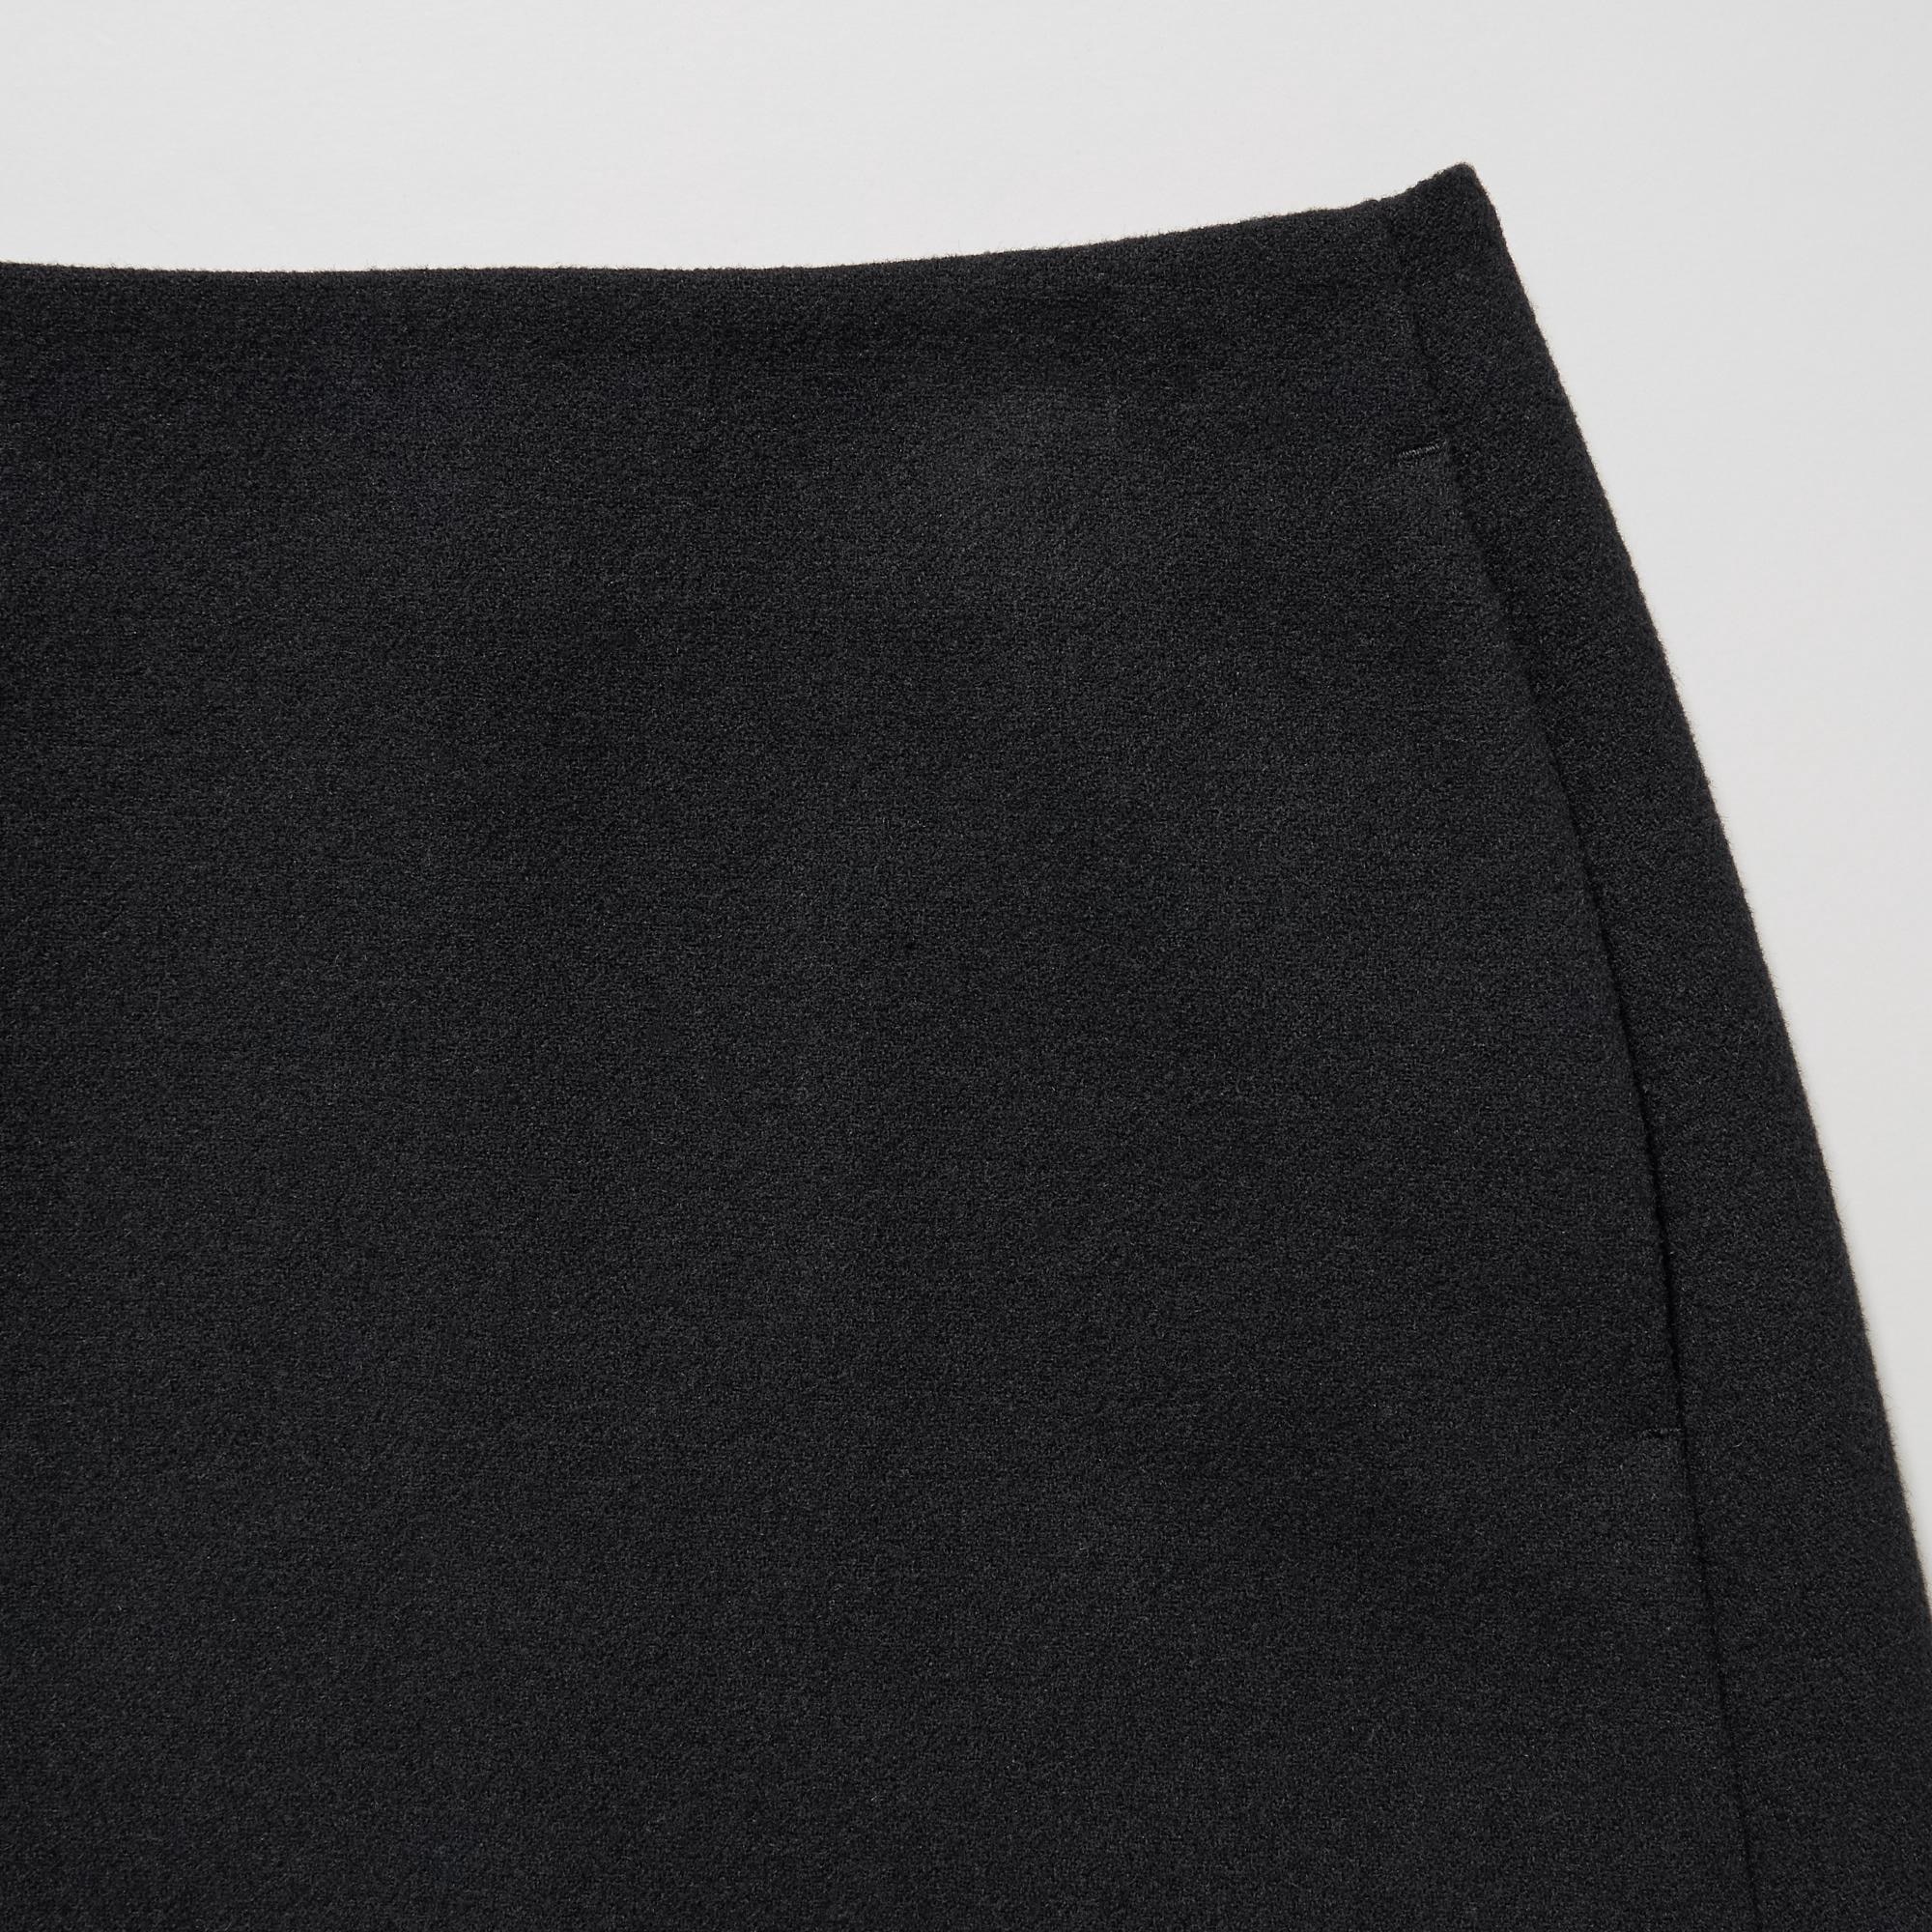 Uniqlo Women's Midi Skirt W 29 in Black Polyester with Wool